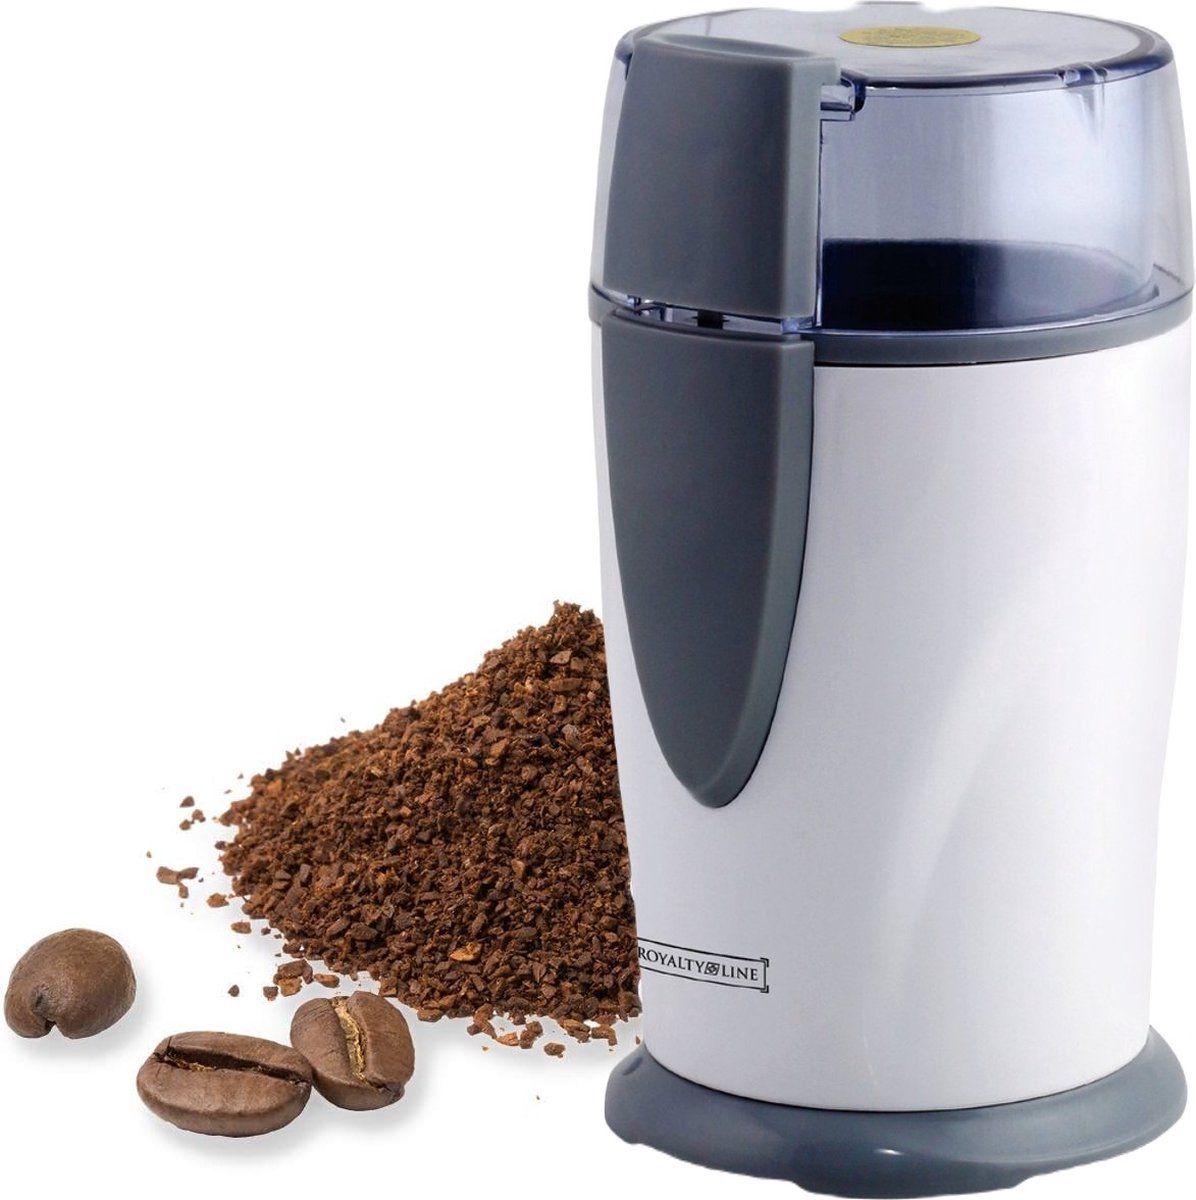 Electric Coffee/Spice Grinder - One Touch Operation - 150W - White - Royalty Line